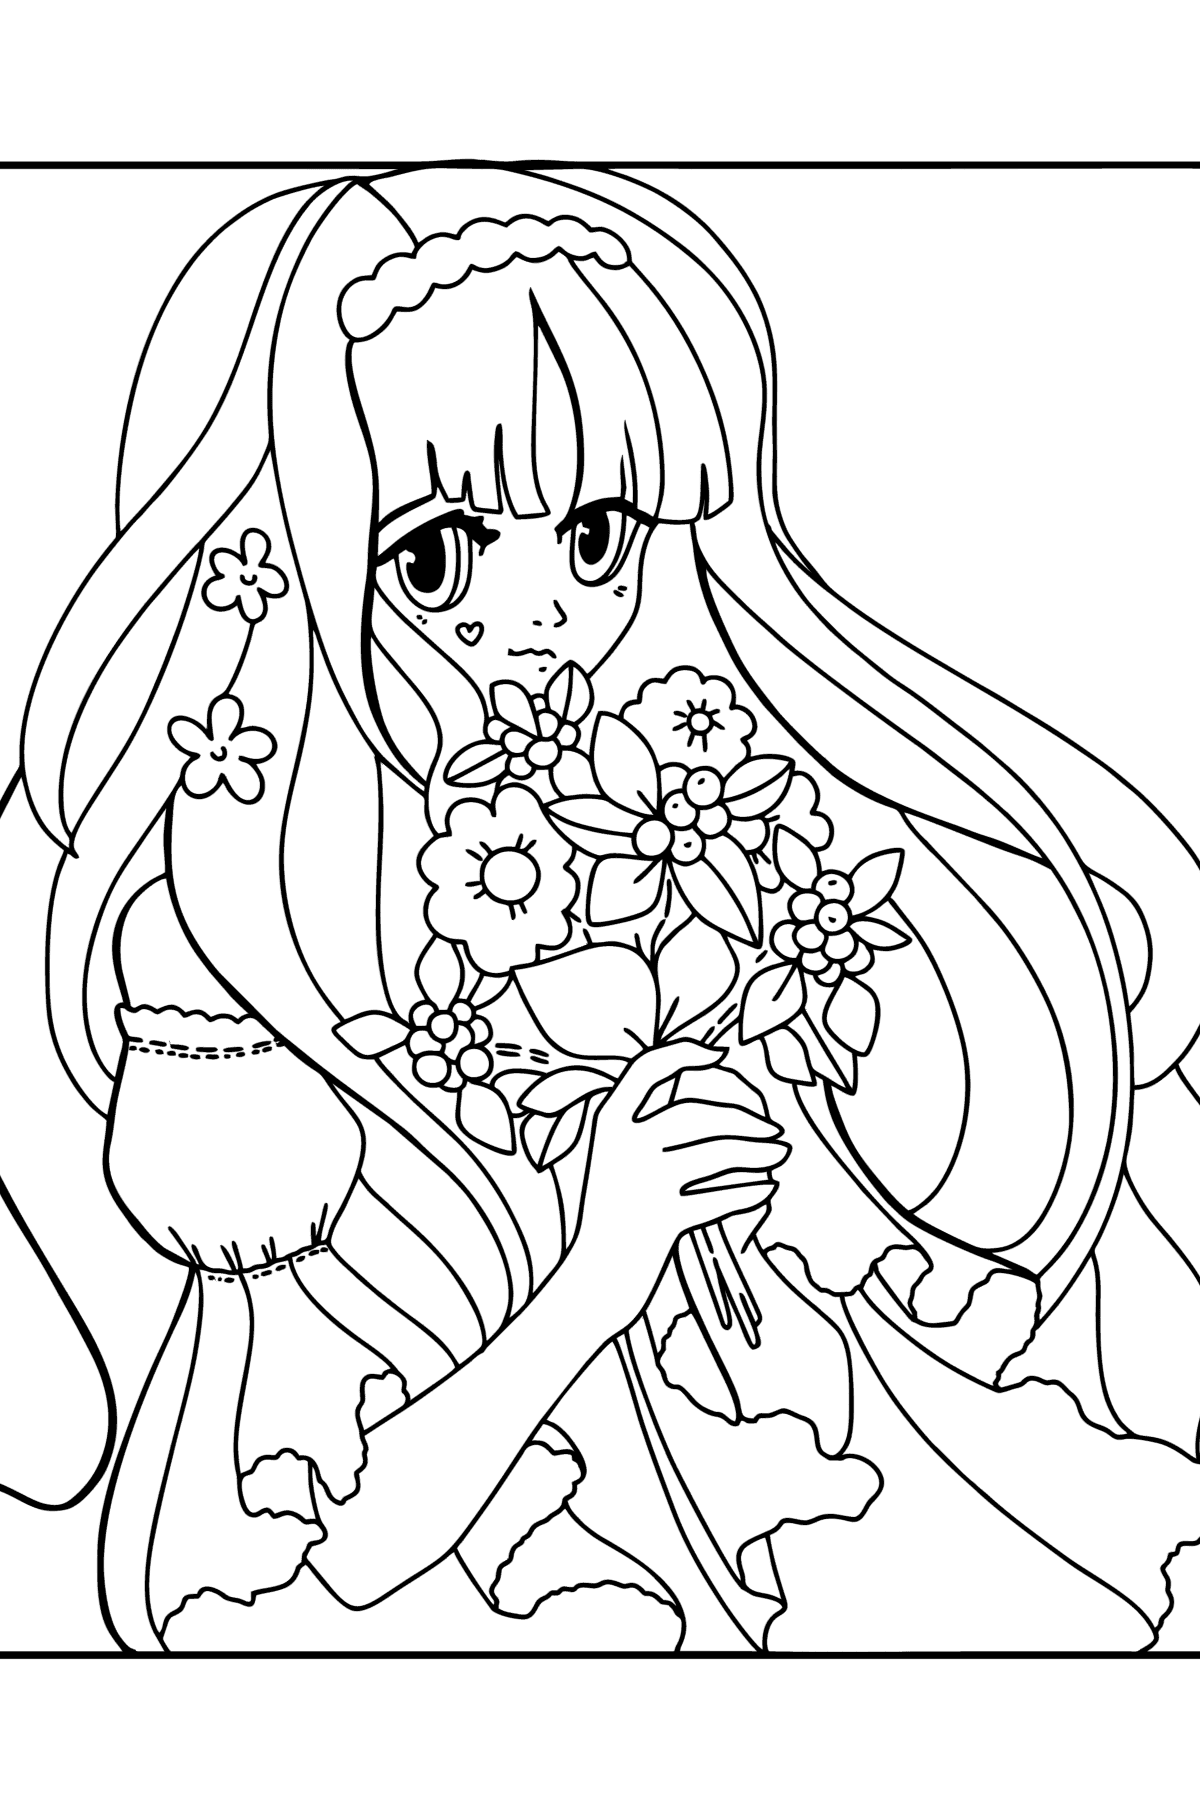 Japanese girl with long hair coloring page - Coloring Pages for Kids